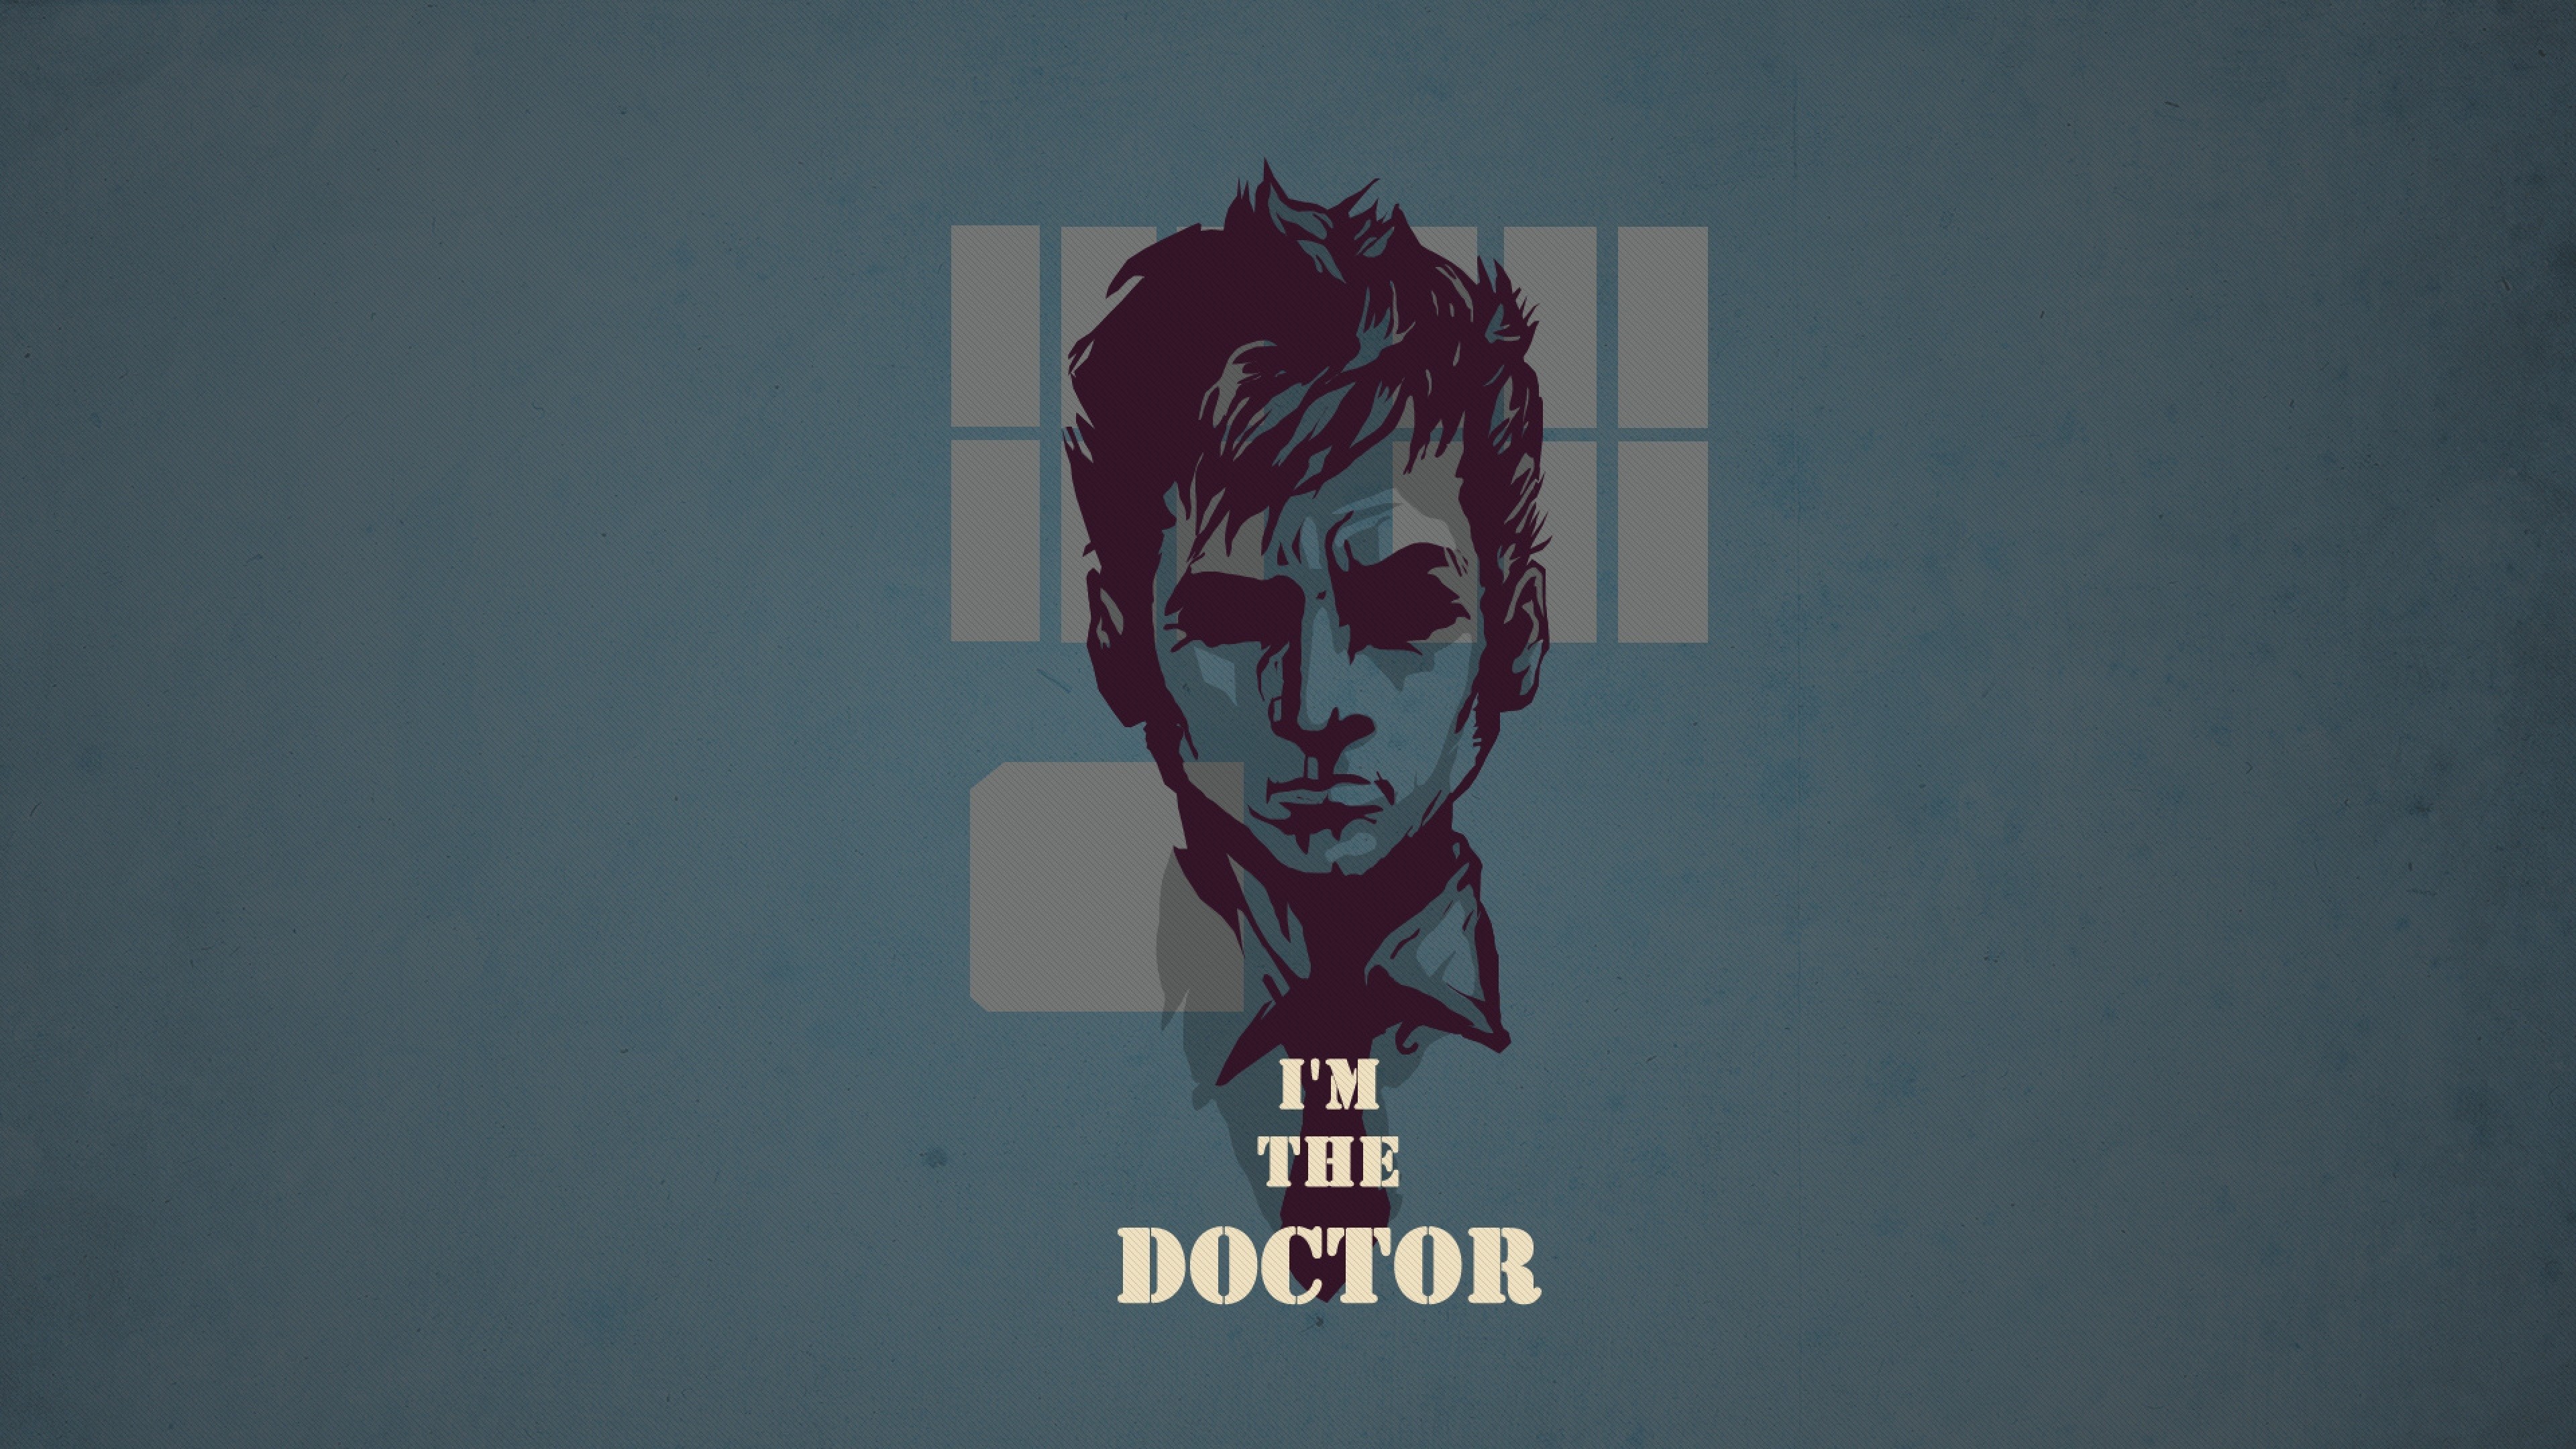 3840x2160 minimalistic text artwork doctor who simple background wallpaper Wallpaper  HD